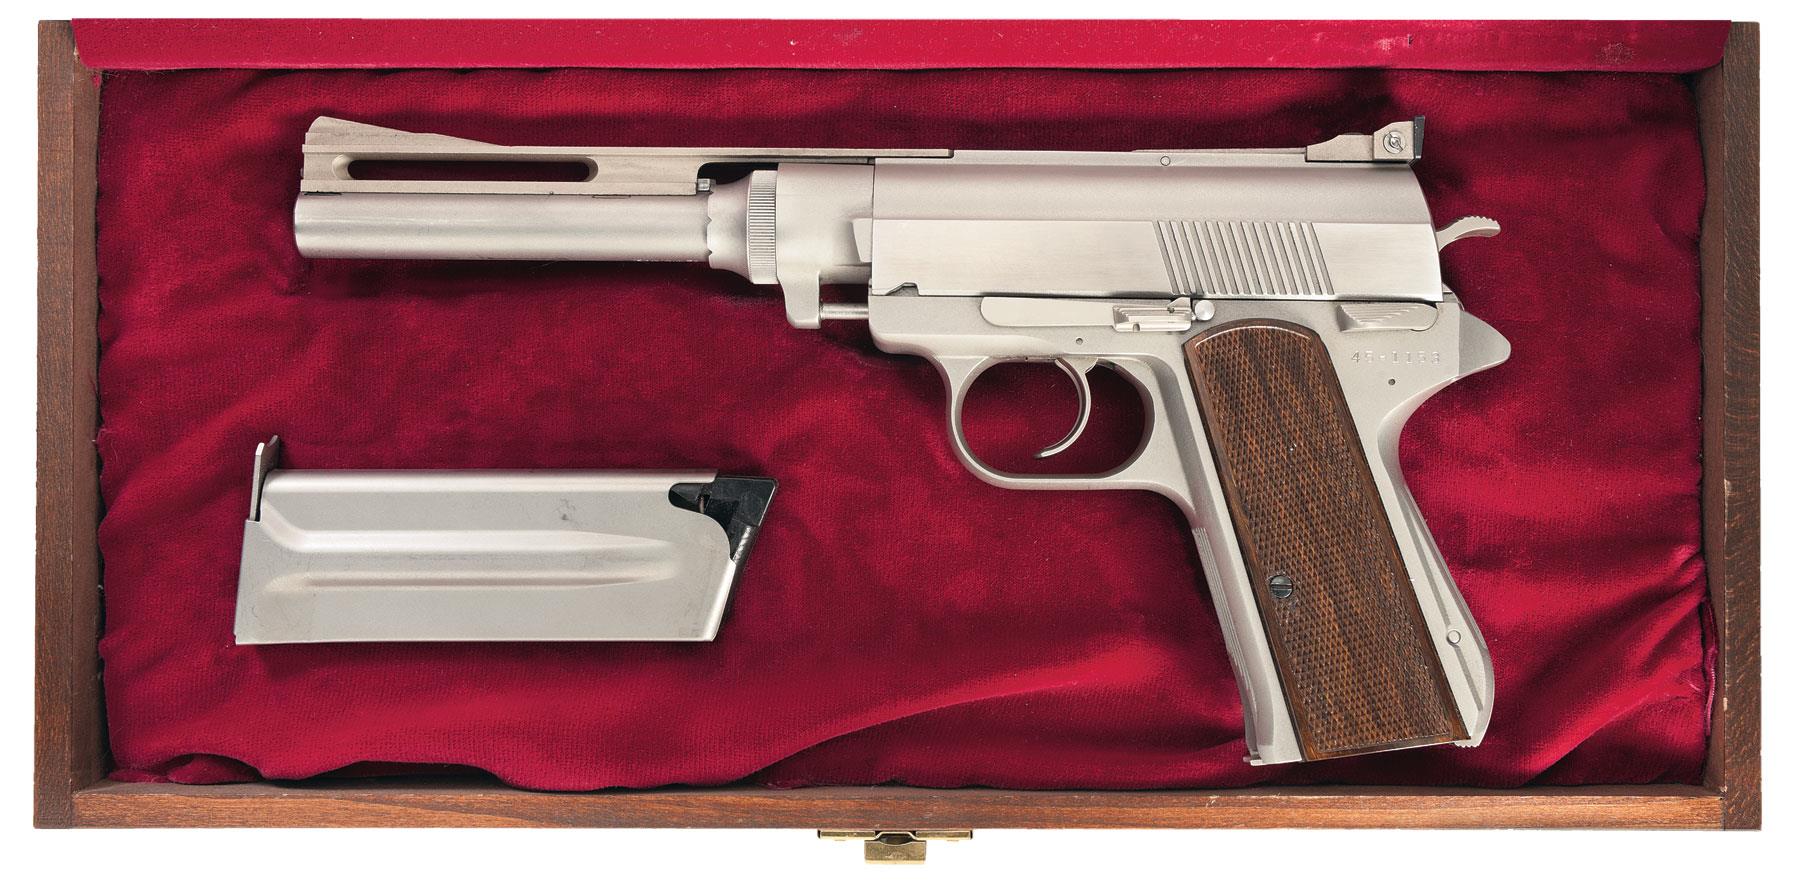 Desirable Wildey Semi-Automatic Pistol with Extra Magazine and Display Case...